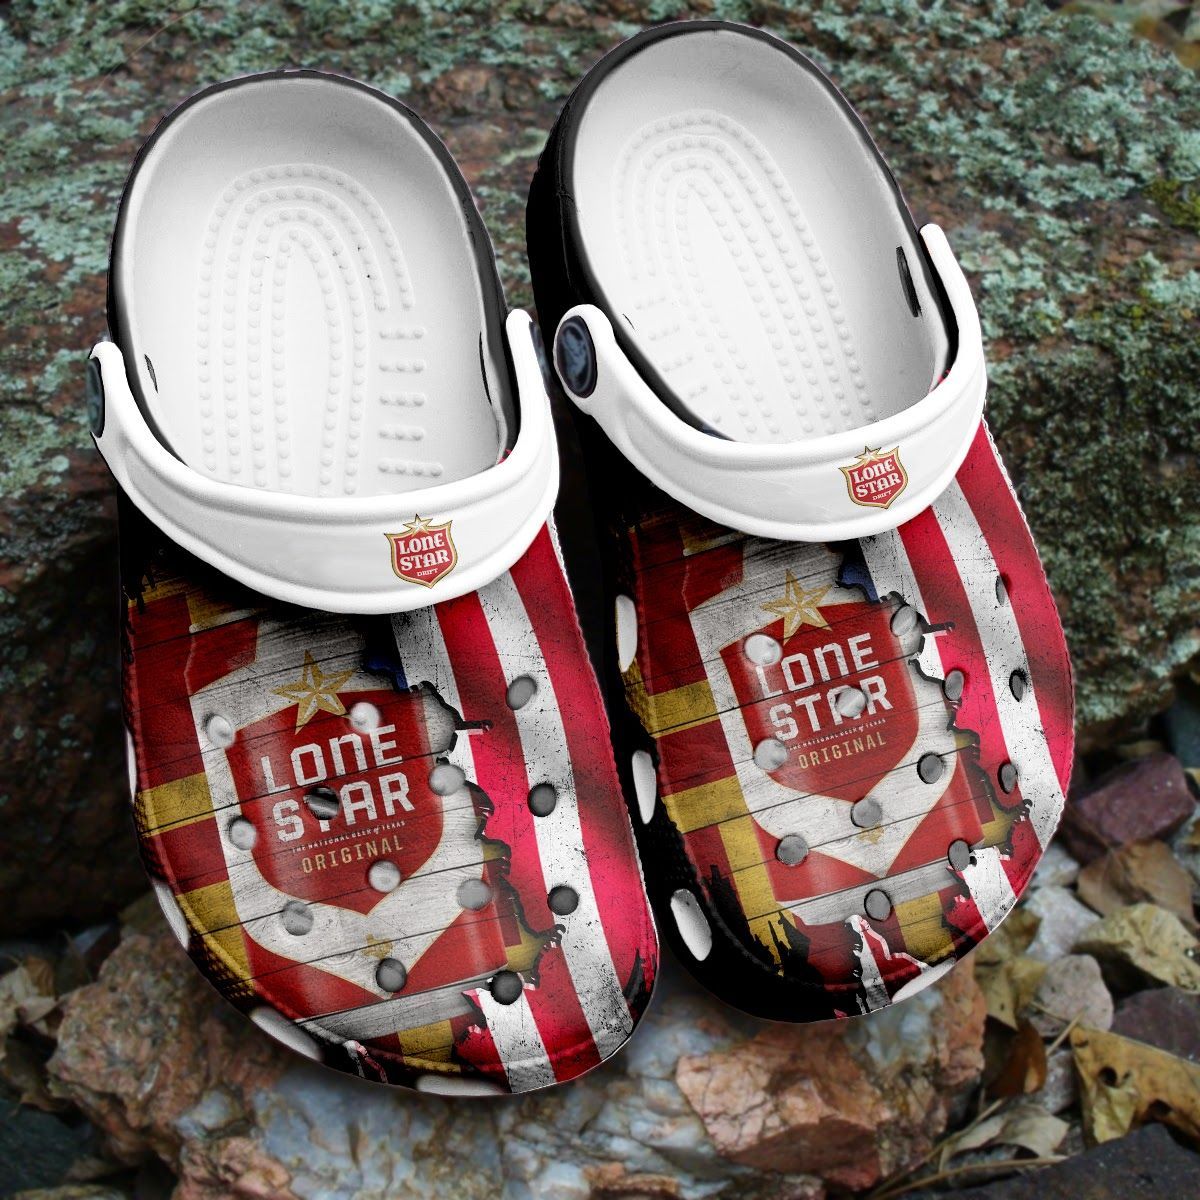 If you'd like to purchase a pair of Crocband Clogs, be sure to check out the official website. 123